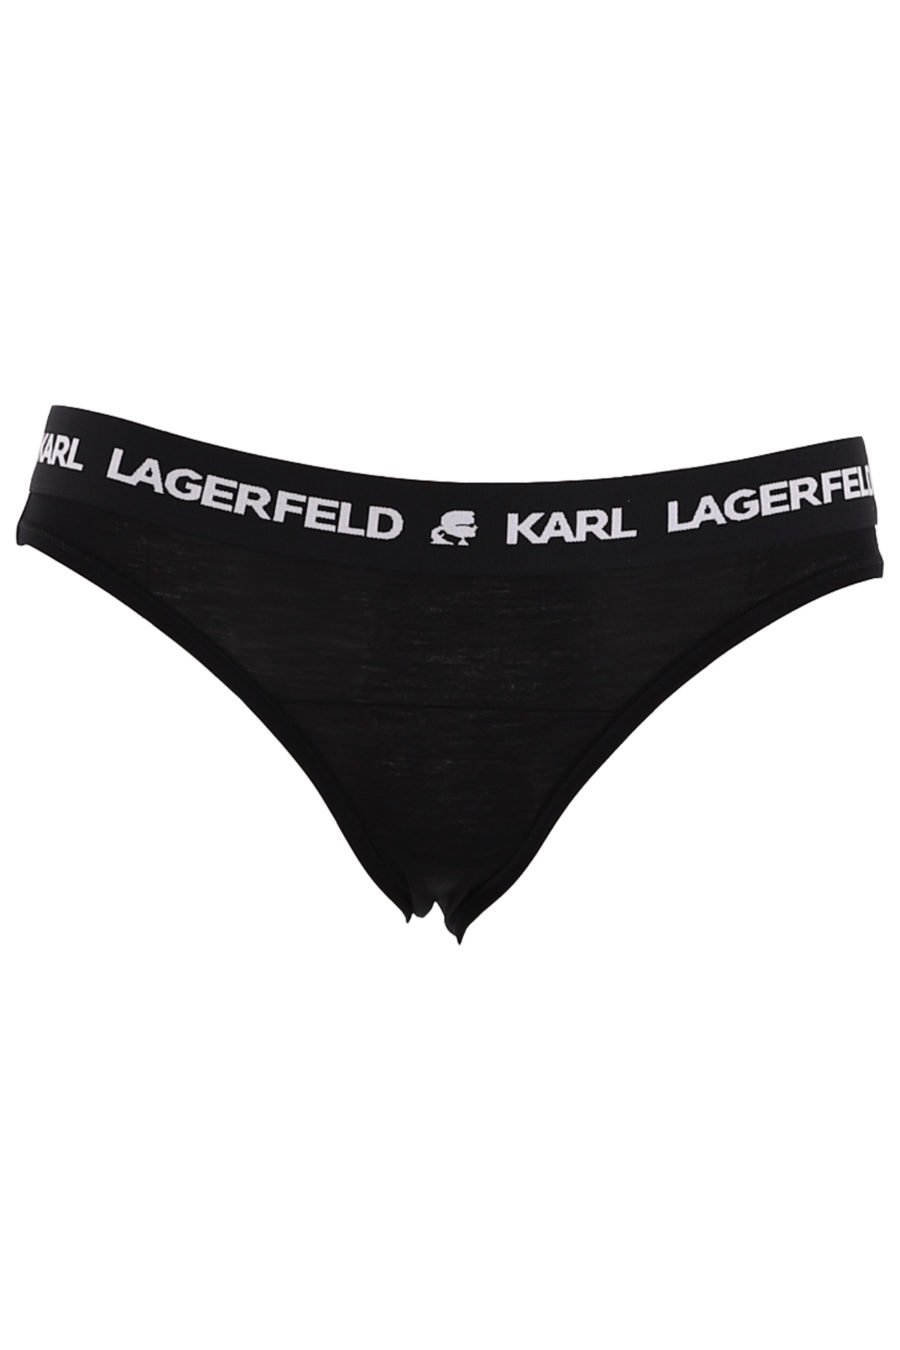 Pack of two black knickers with logo - c6498958888d42c7c8d8d8c276951818b31c052ca0b3